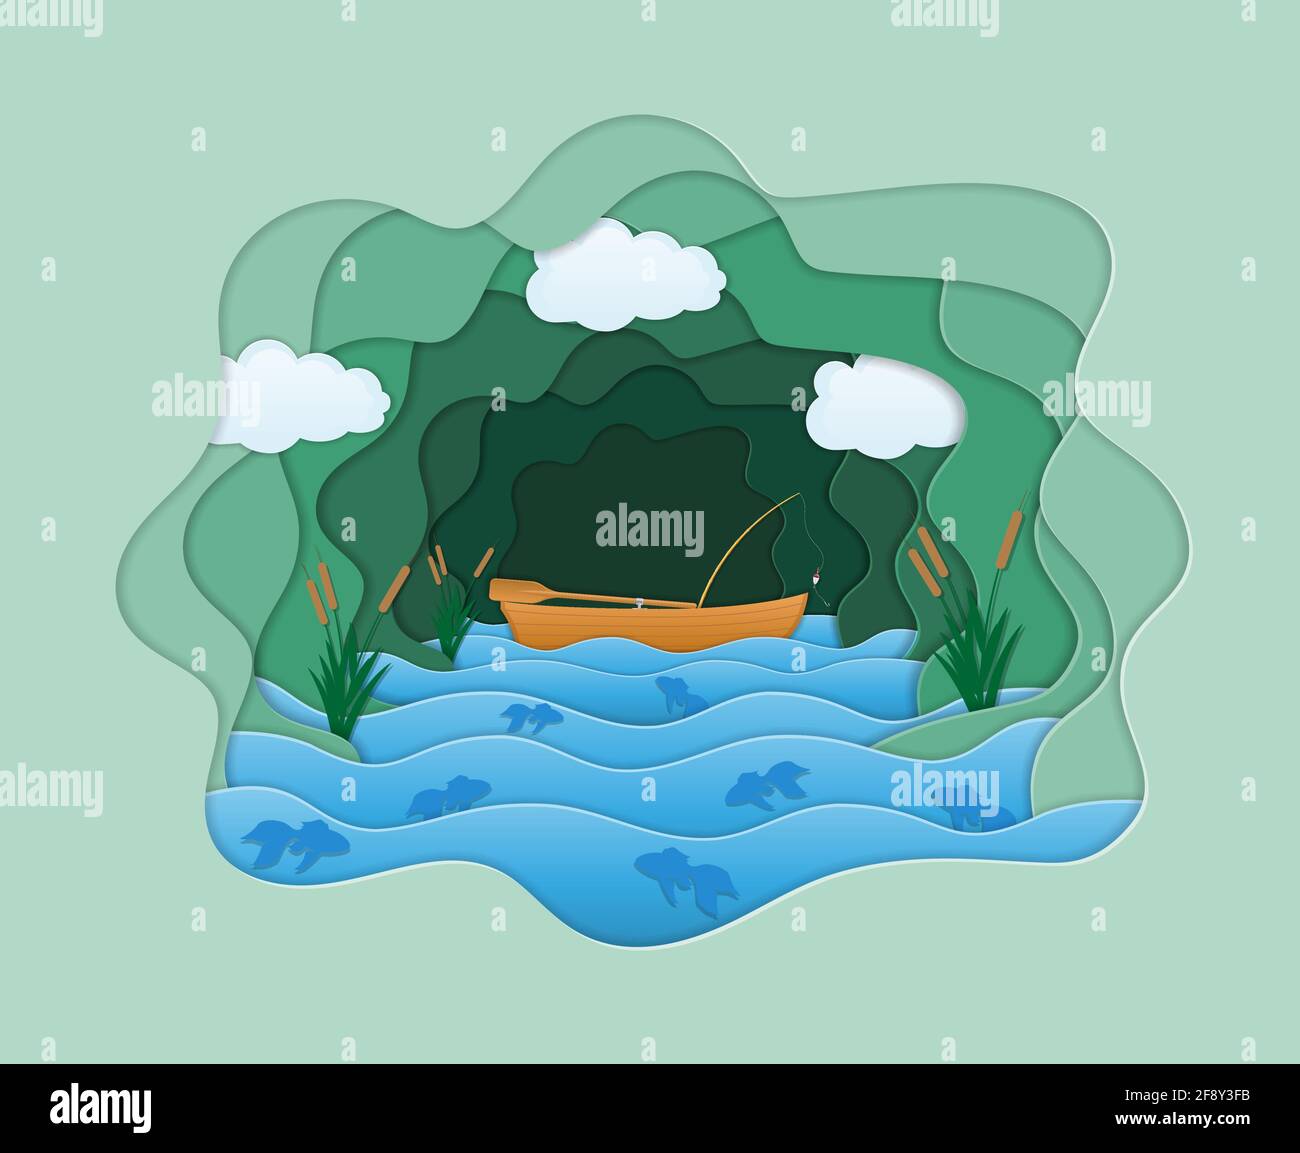 Fishing with dad Stock Vector Images - Page 2 - Alamy